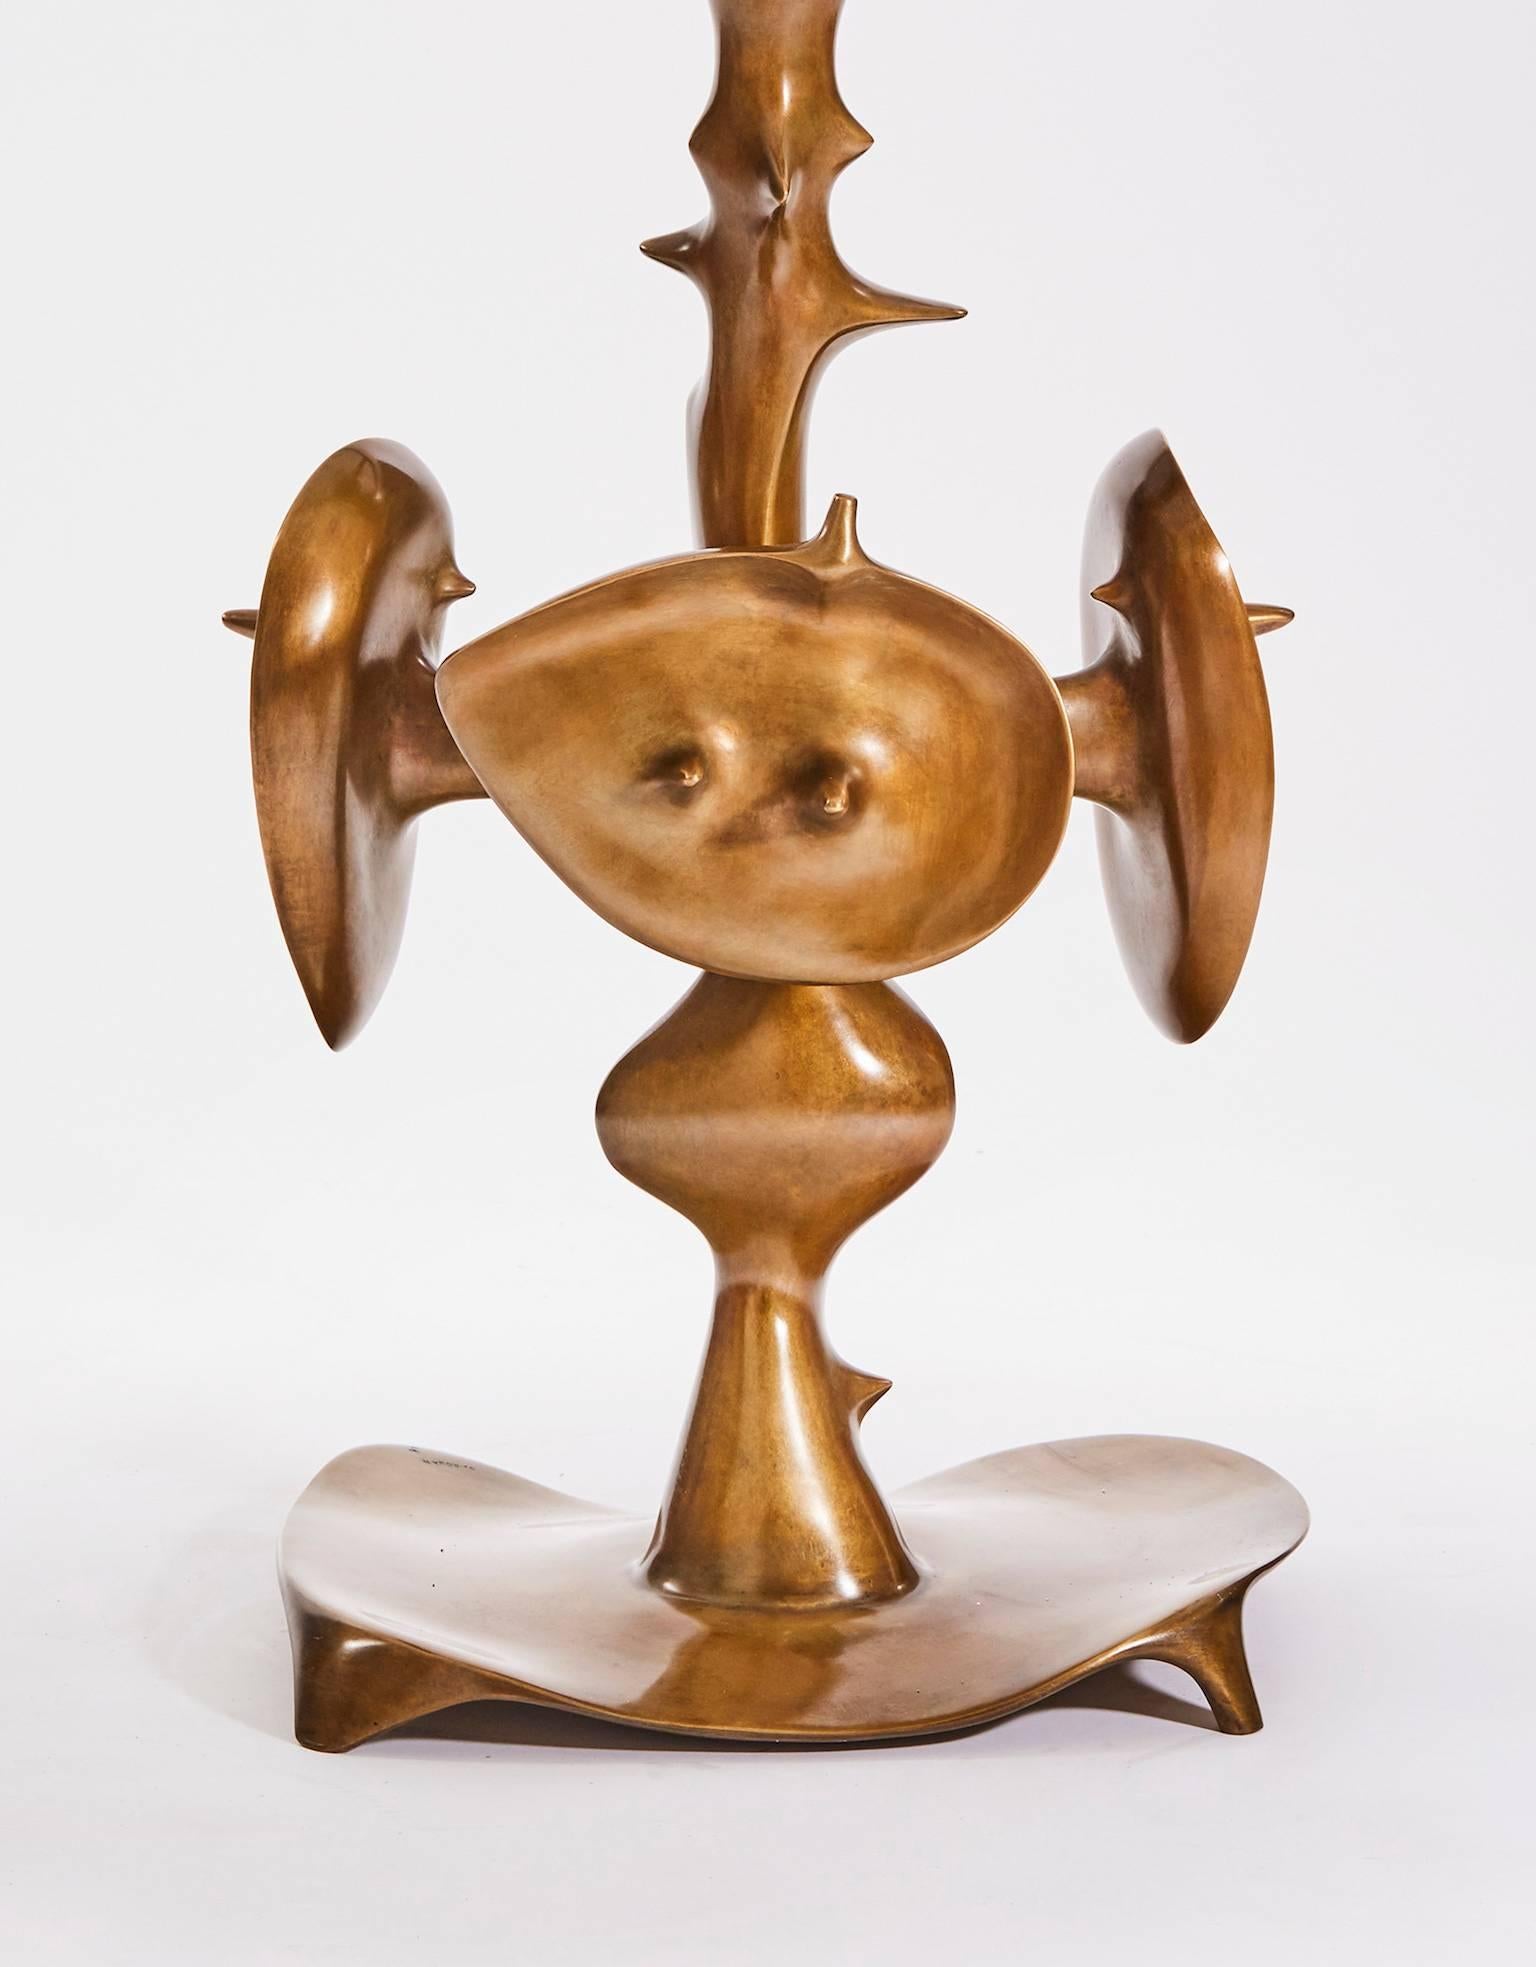 Pedestal table with surrealist shapes. 
Composed by a bronze leg with a surrealist ornamentation mounted by a white marble circular plate.

Model signed and numbered.
Limited edition of 8 + 4 AP of a model created in the 1970's by the sculptor